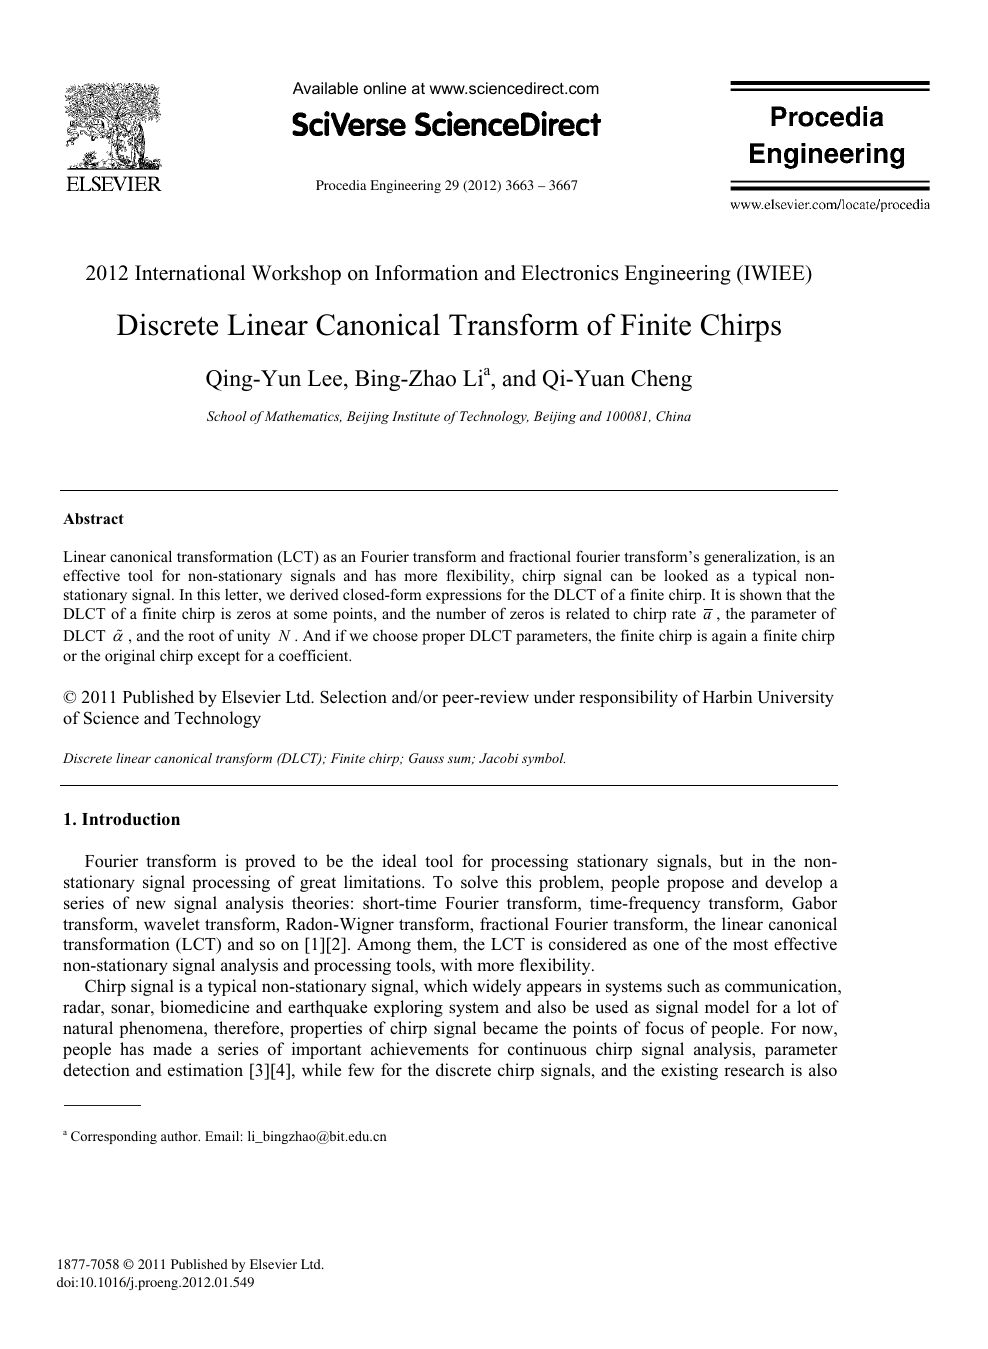 Discrete Linear Canonical Transform Of Finite Chirps Topic Of Research Paper In Materials Engineering Download Scholarly Article Pdf And Read For Free On Cyberleninka Open Science Hub